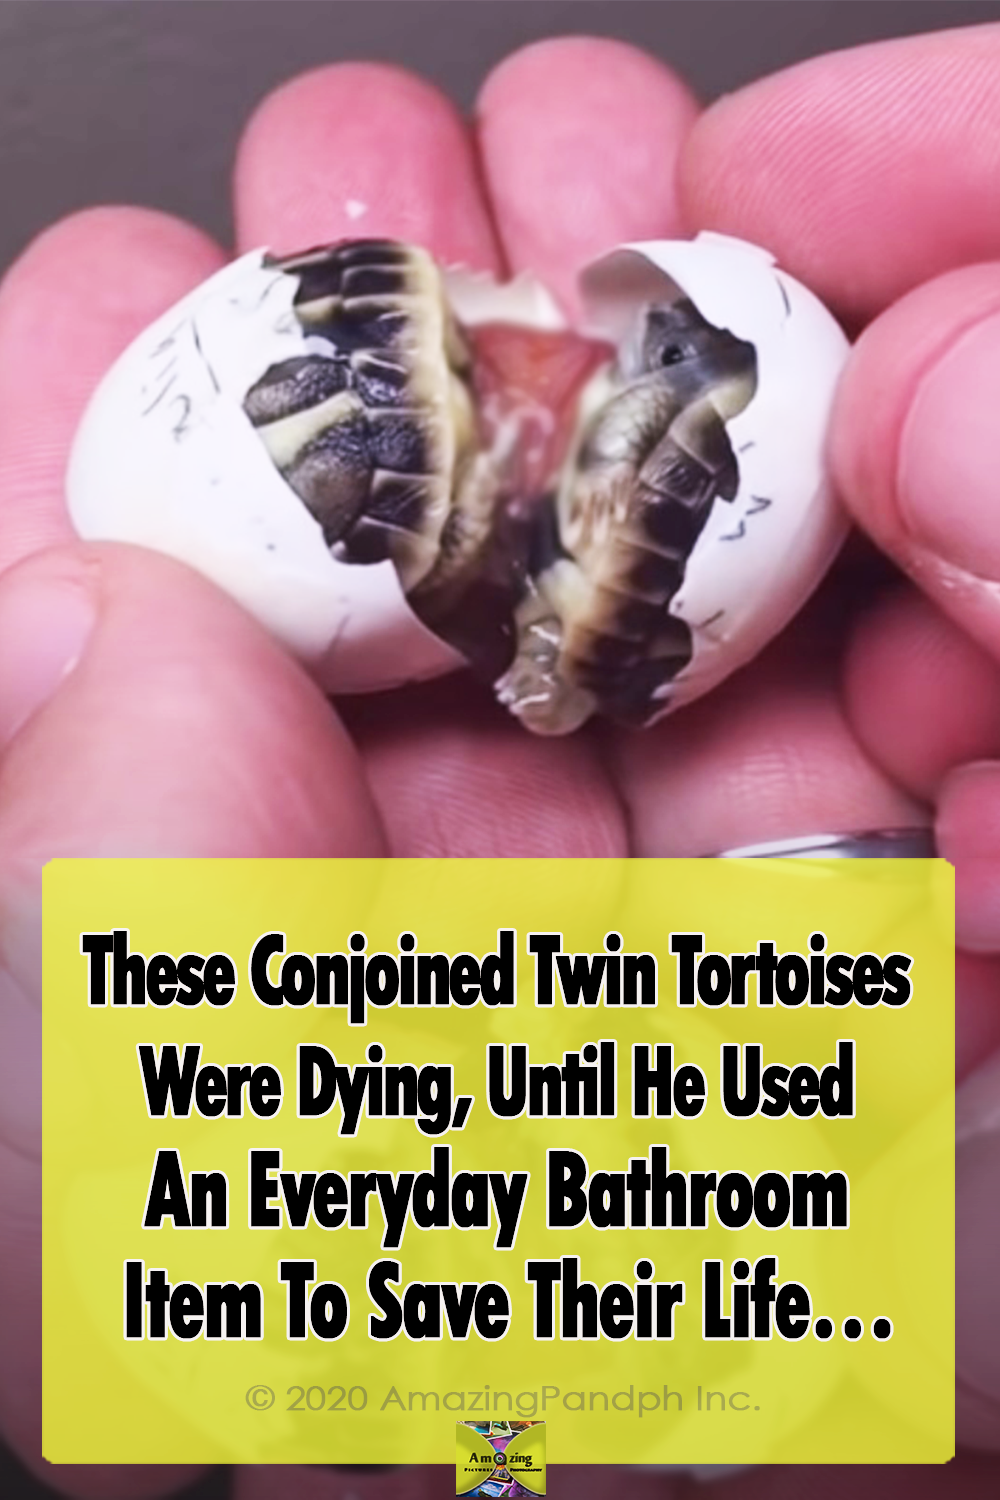 Conjoined, Twins, Tortoise, unbelievable, turtles, Newborn, Story, Save life, Rescue,